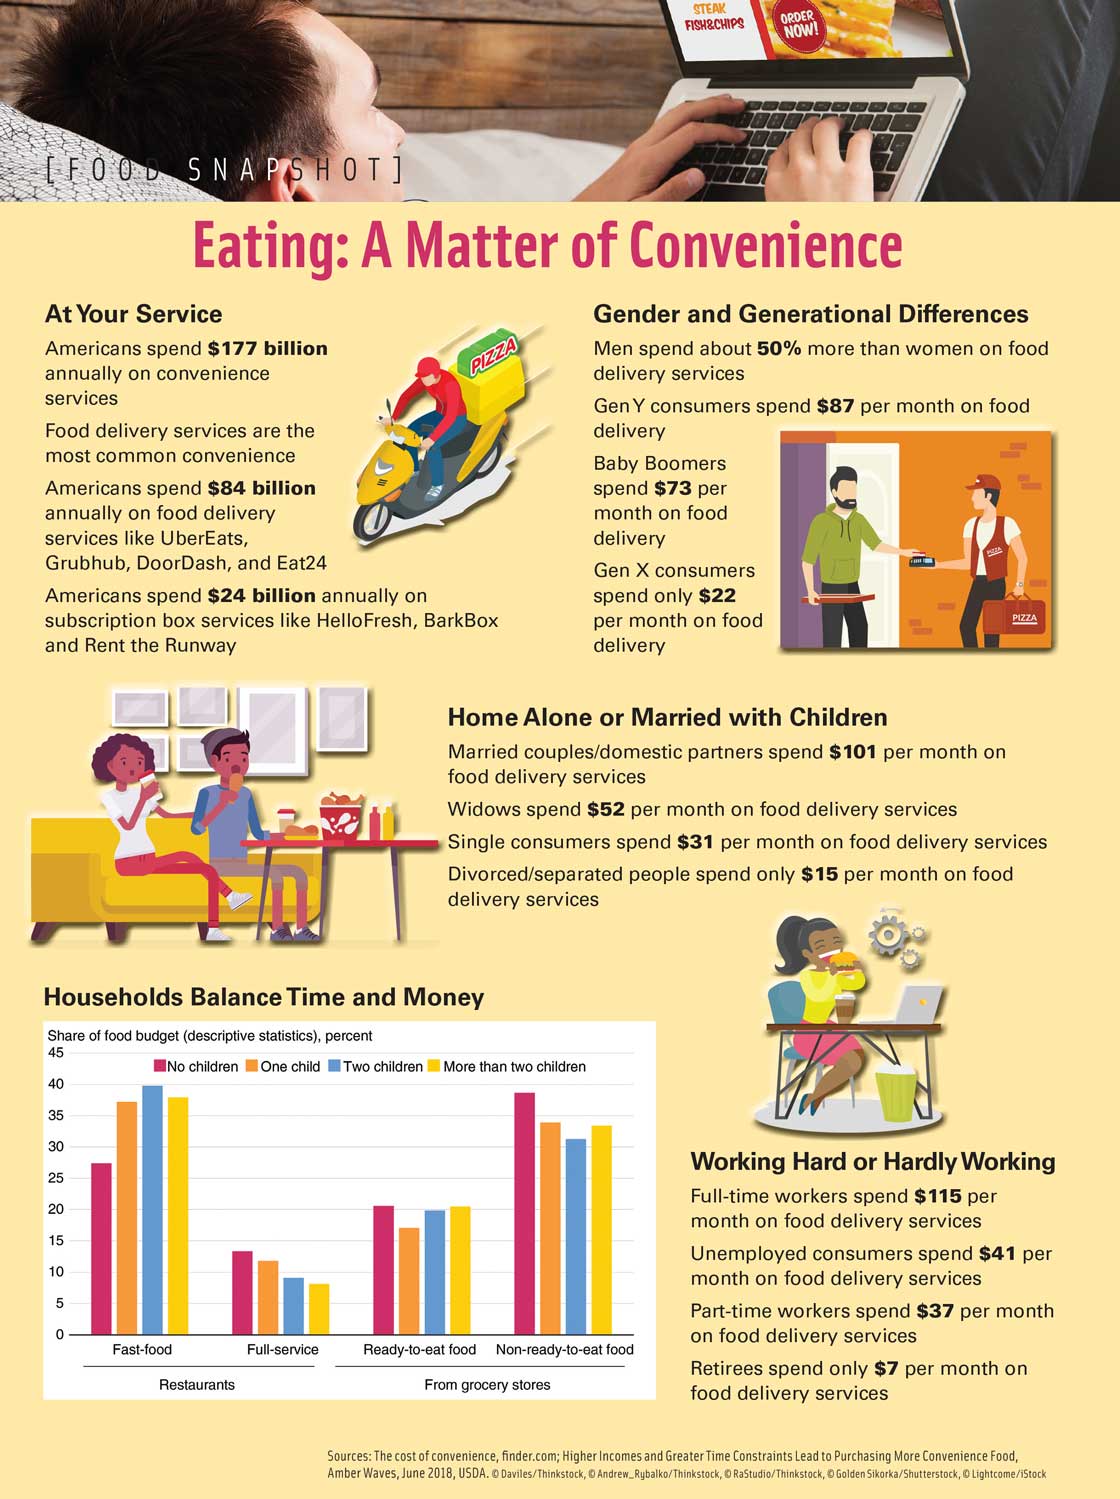 Eating: A Matter of Convenience. Sources: The cost of convenience, finder.com; Higher Incomes and Greater Time Constraints Lead to Purchasing More Convenience Food, Amber Waves, June 2018, USDA.